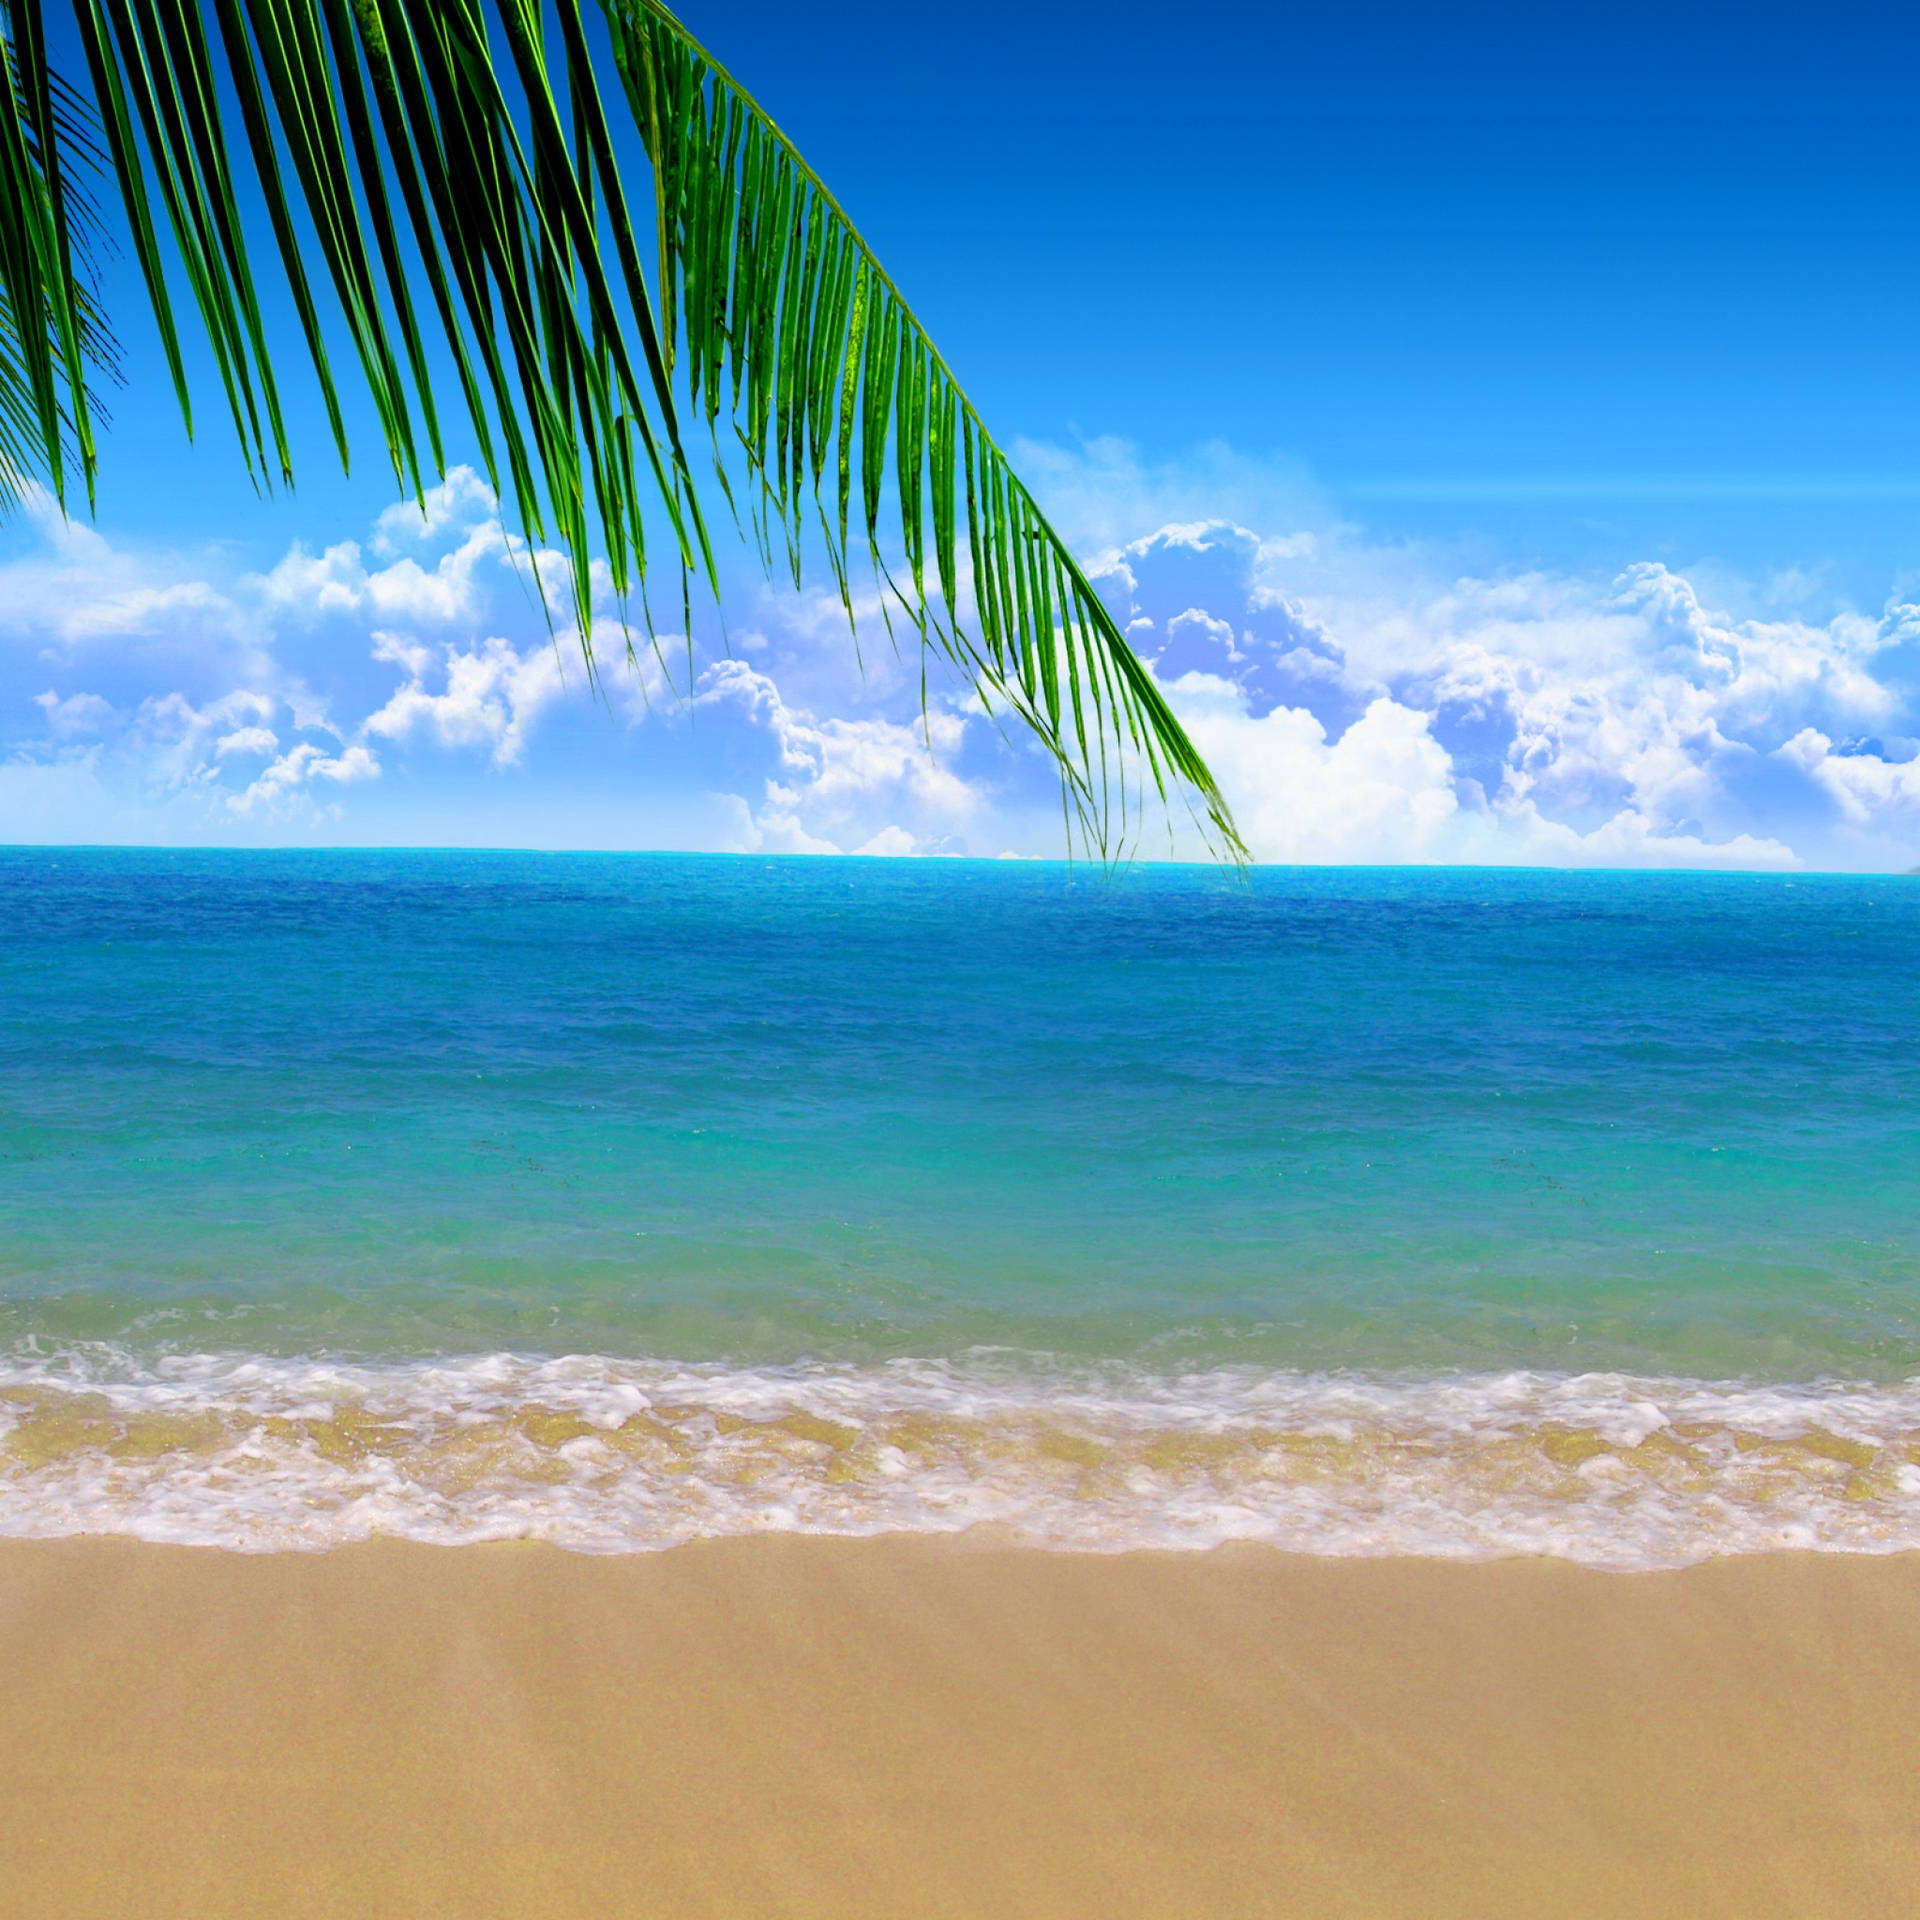 Enjoy The Sunny Summer With An Ipad Wallpaper